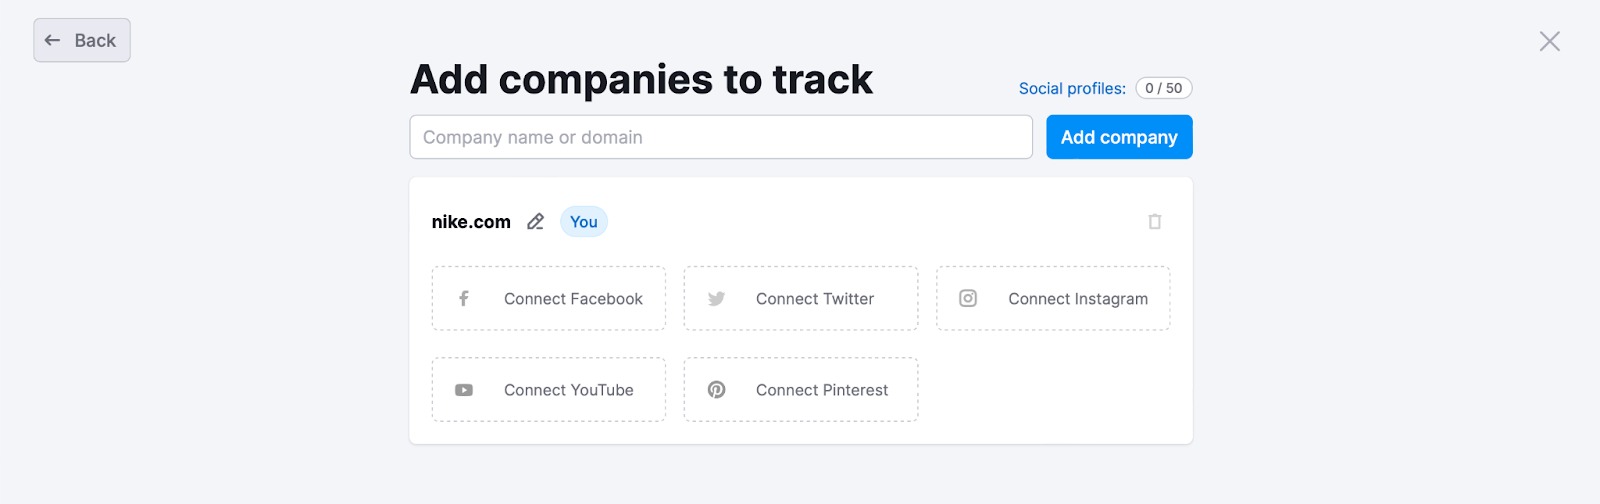 Connecting social media accounts pop up window in Social Tracker.